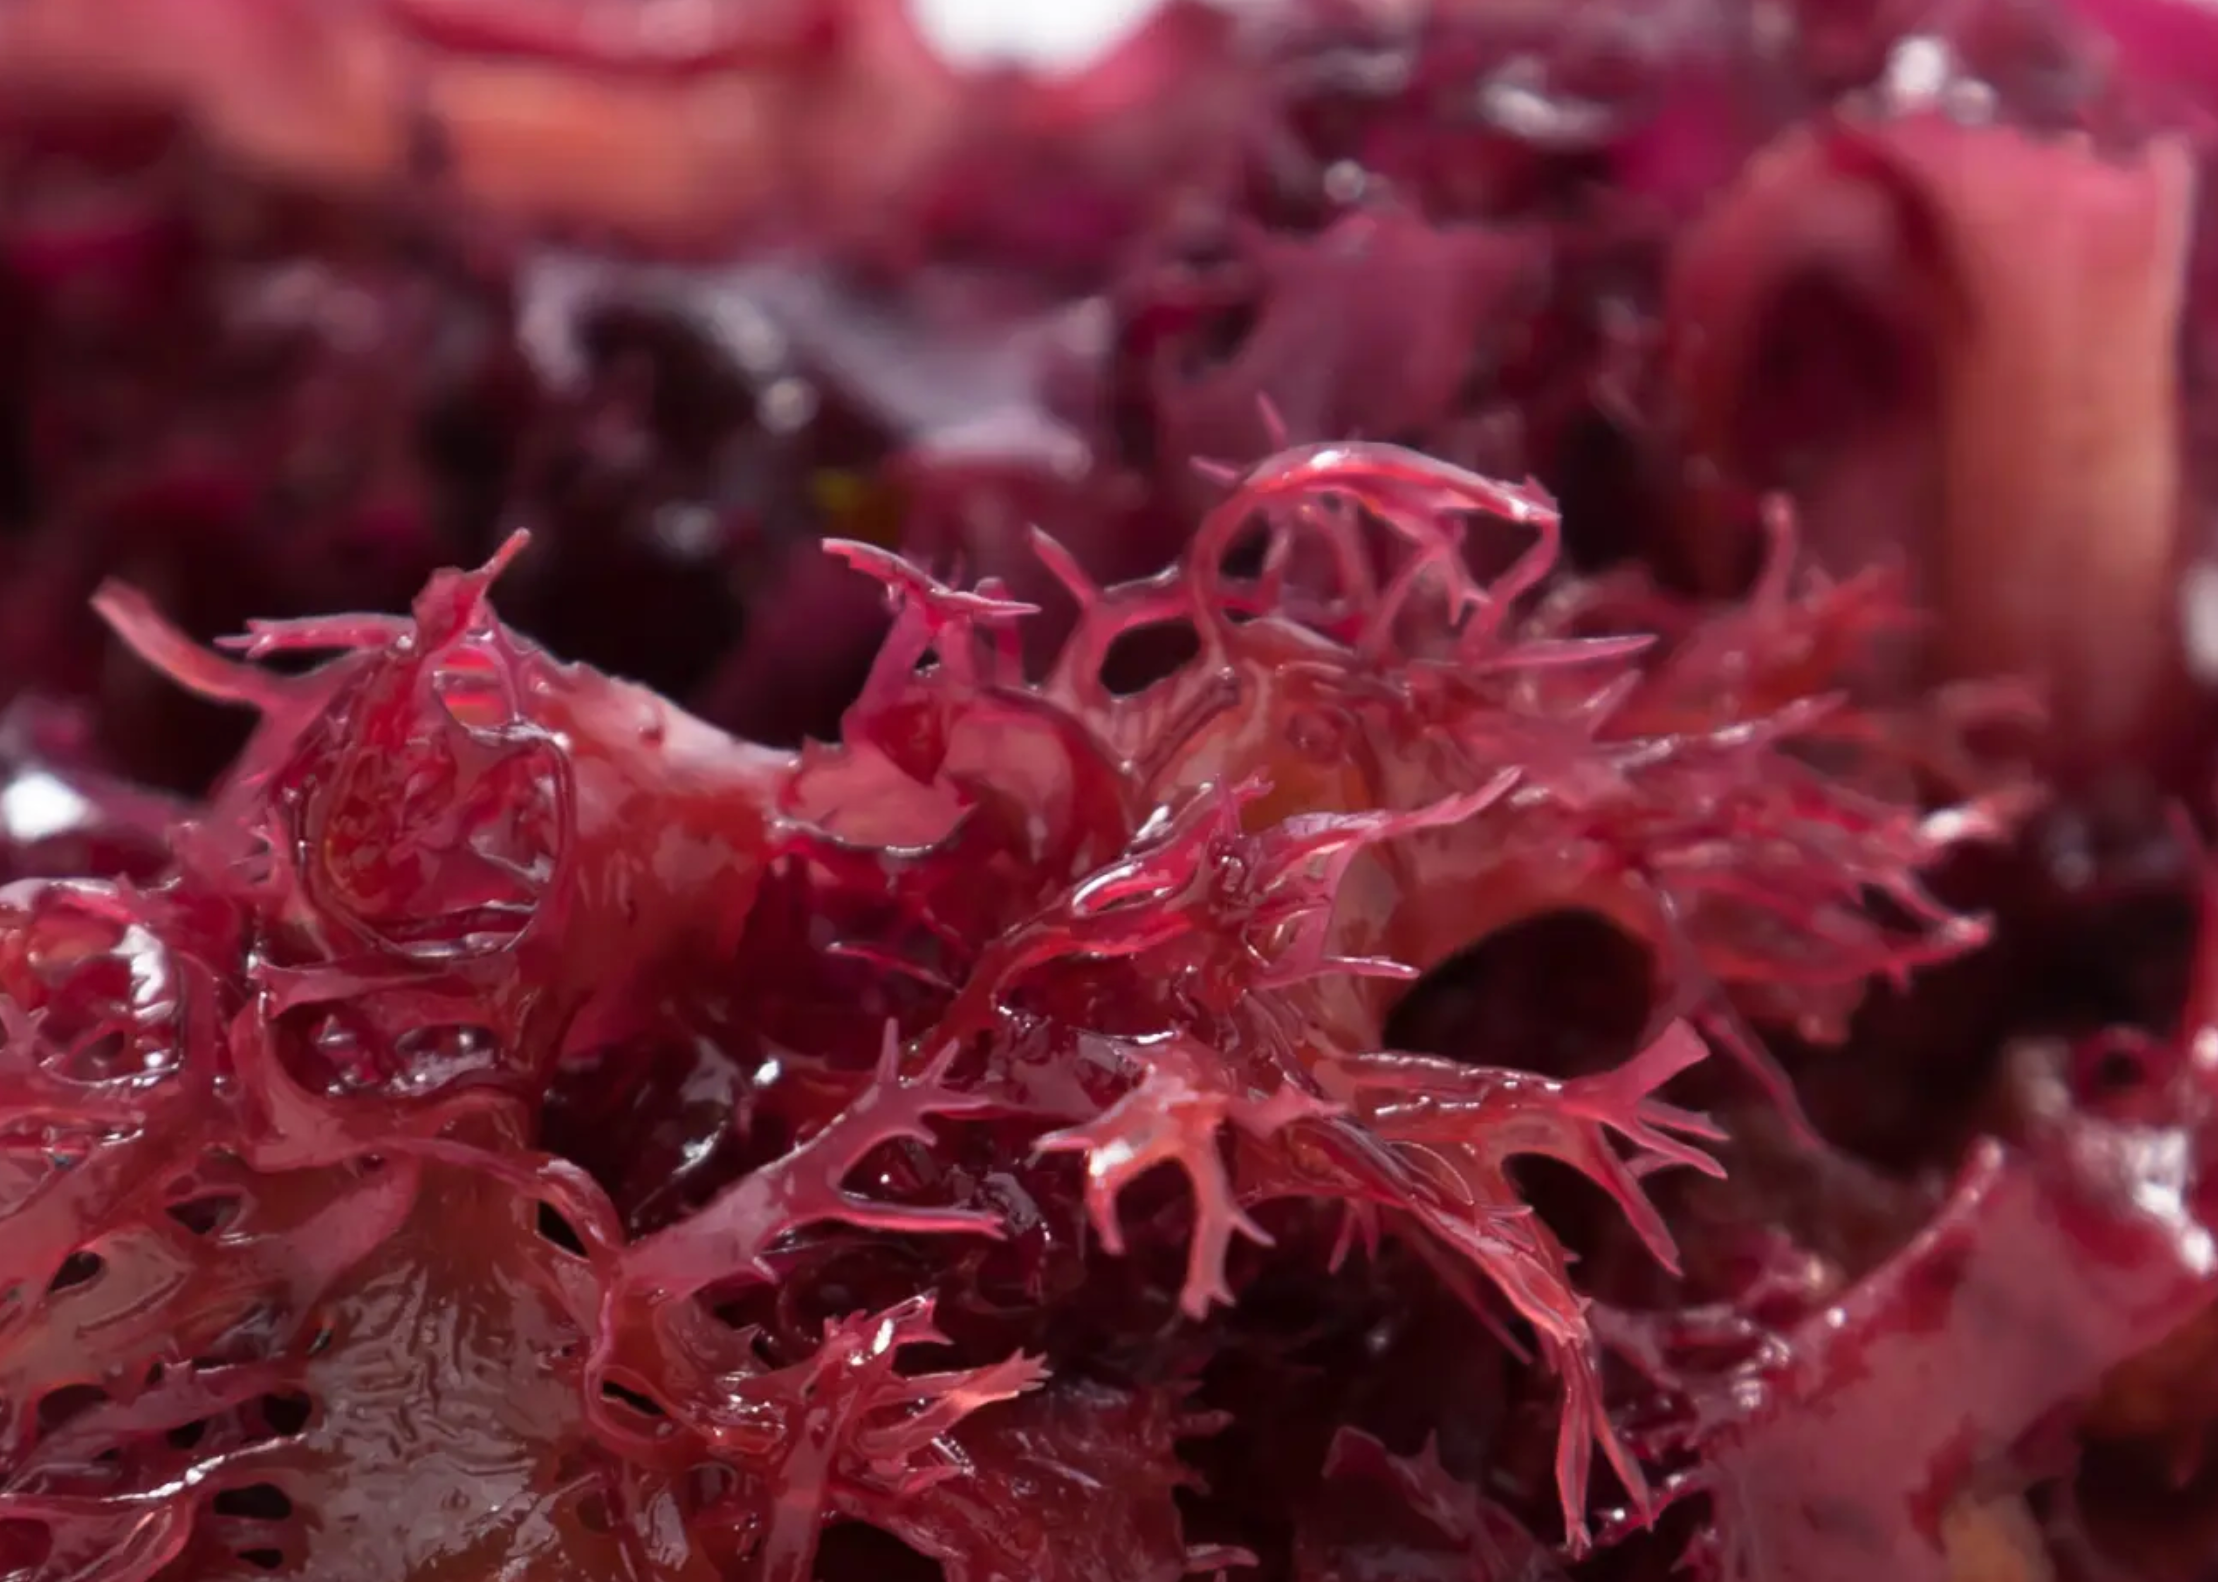 Close-up image of red seaweed with intricate, frilly, and translucent branches. The texture appears glossy and wet, highlighting the vibrant reddish-purple hues. The background is blurred, keeping the focus on the detailed seaweed structures.